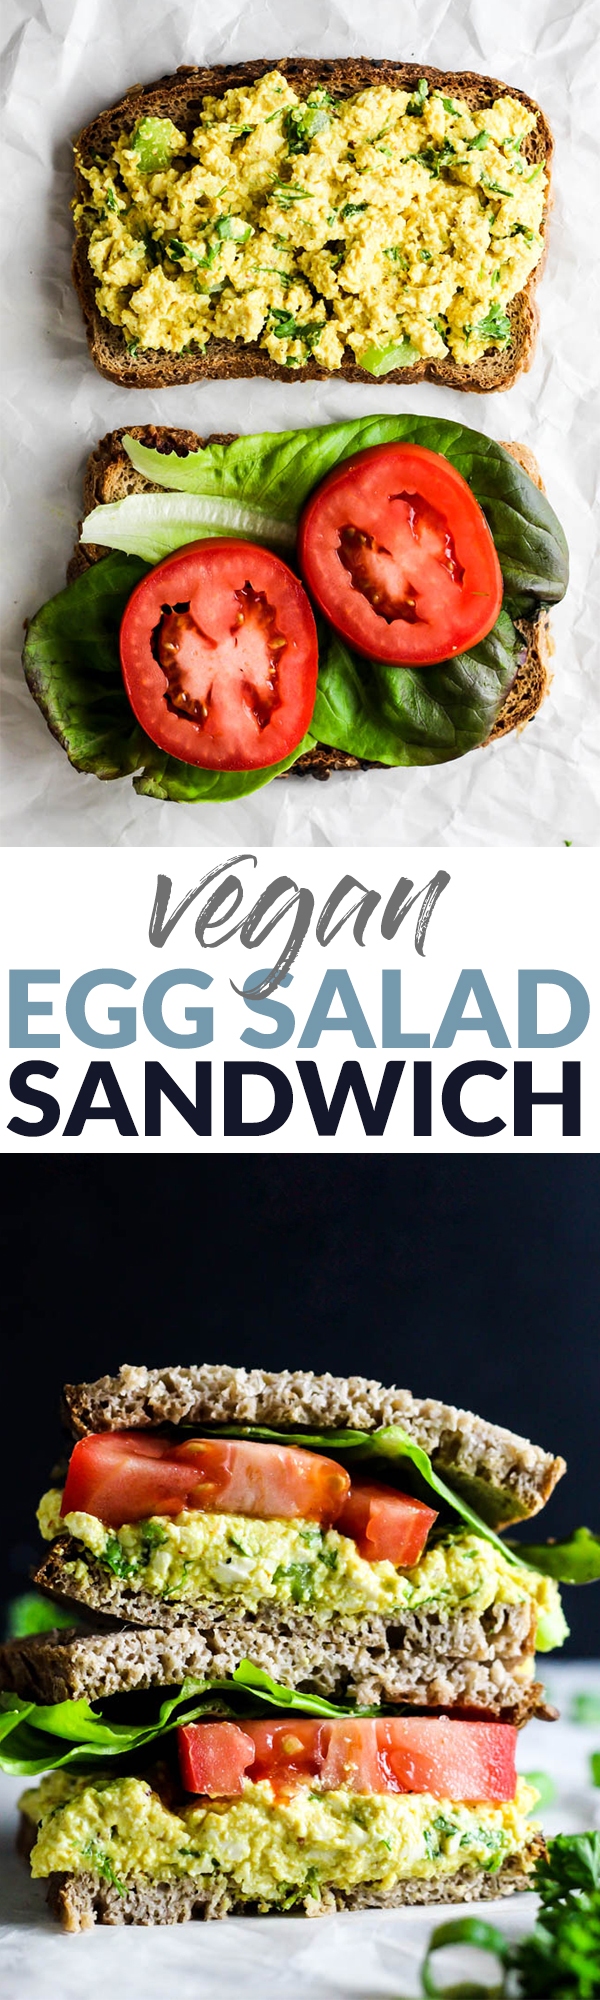 Pack a Vegan Egg Salad Sandwich for your lunch for a flavorful, simple meal! This plant-based version of the classic is even more delicious & nutritious.